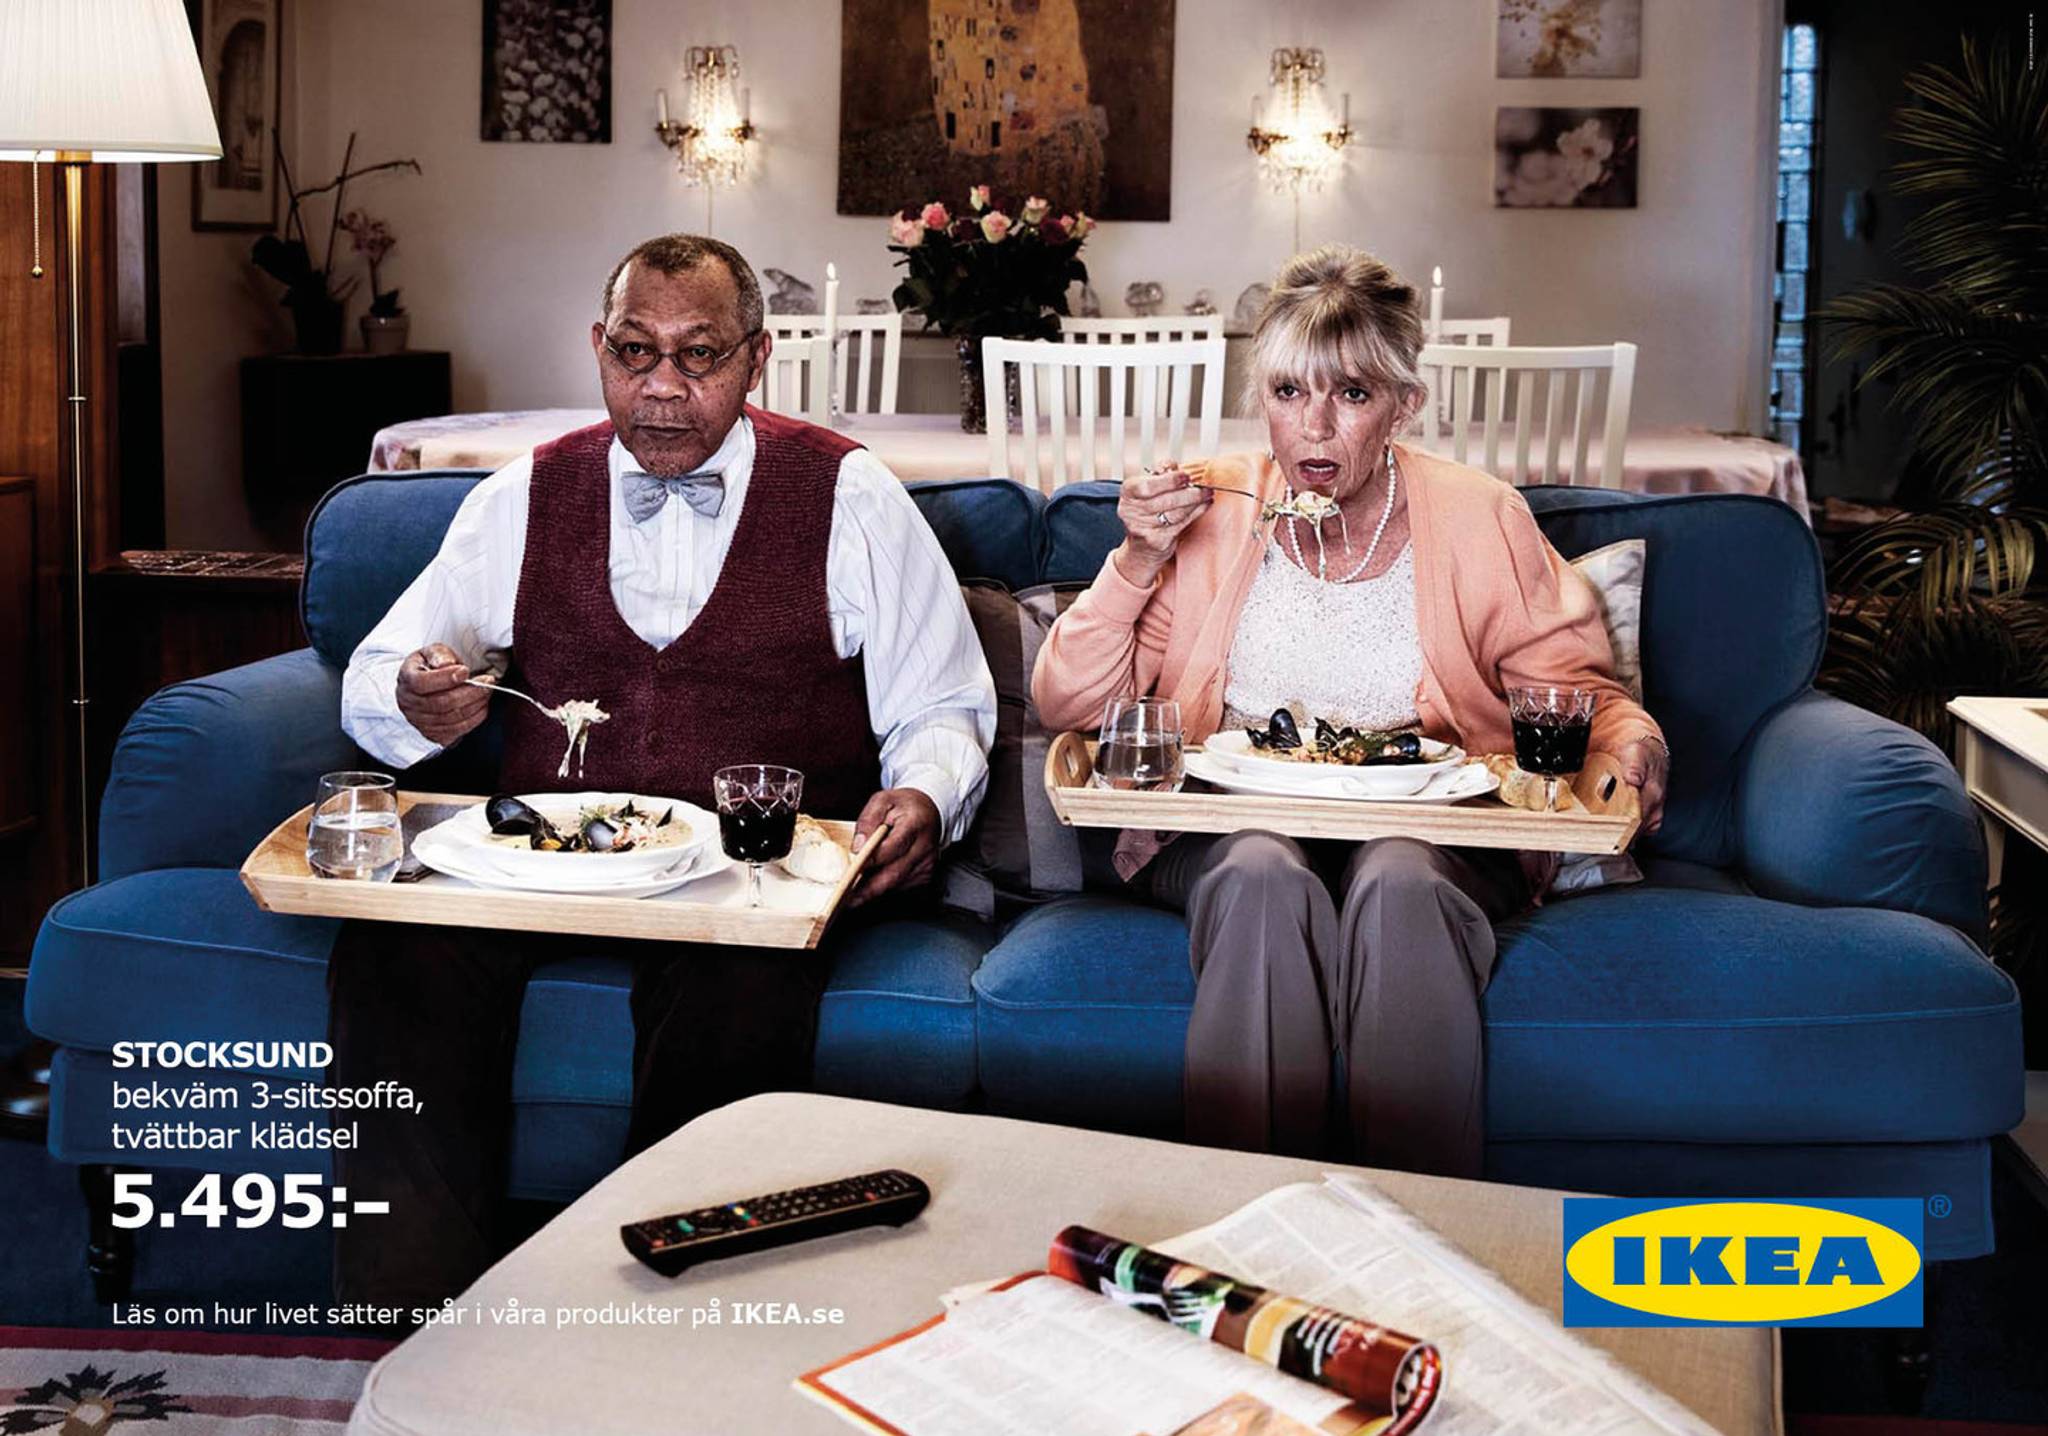 IKEA Where Life Happens: ads for non-nuclear families